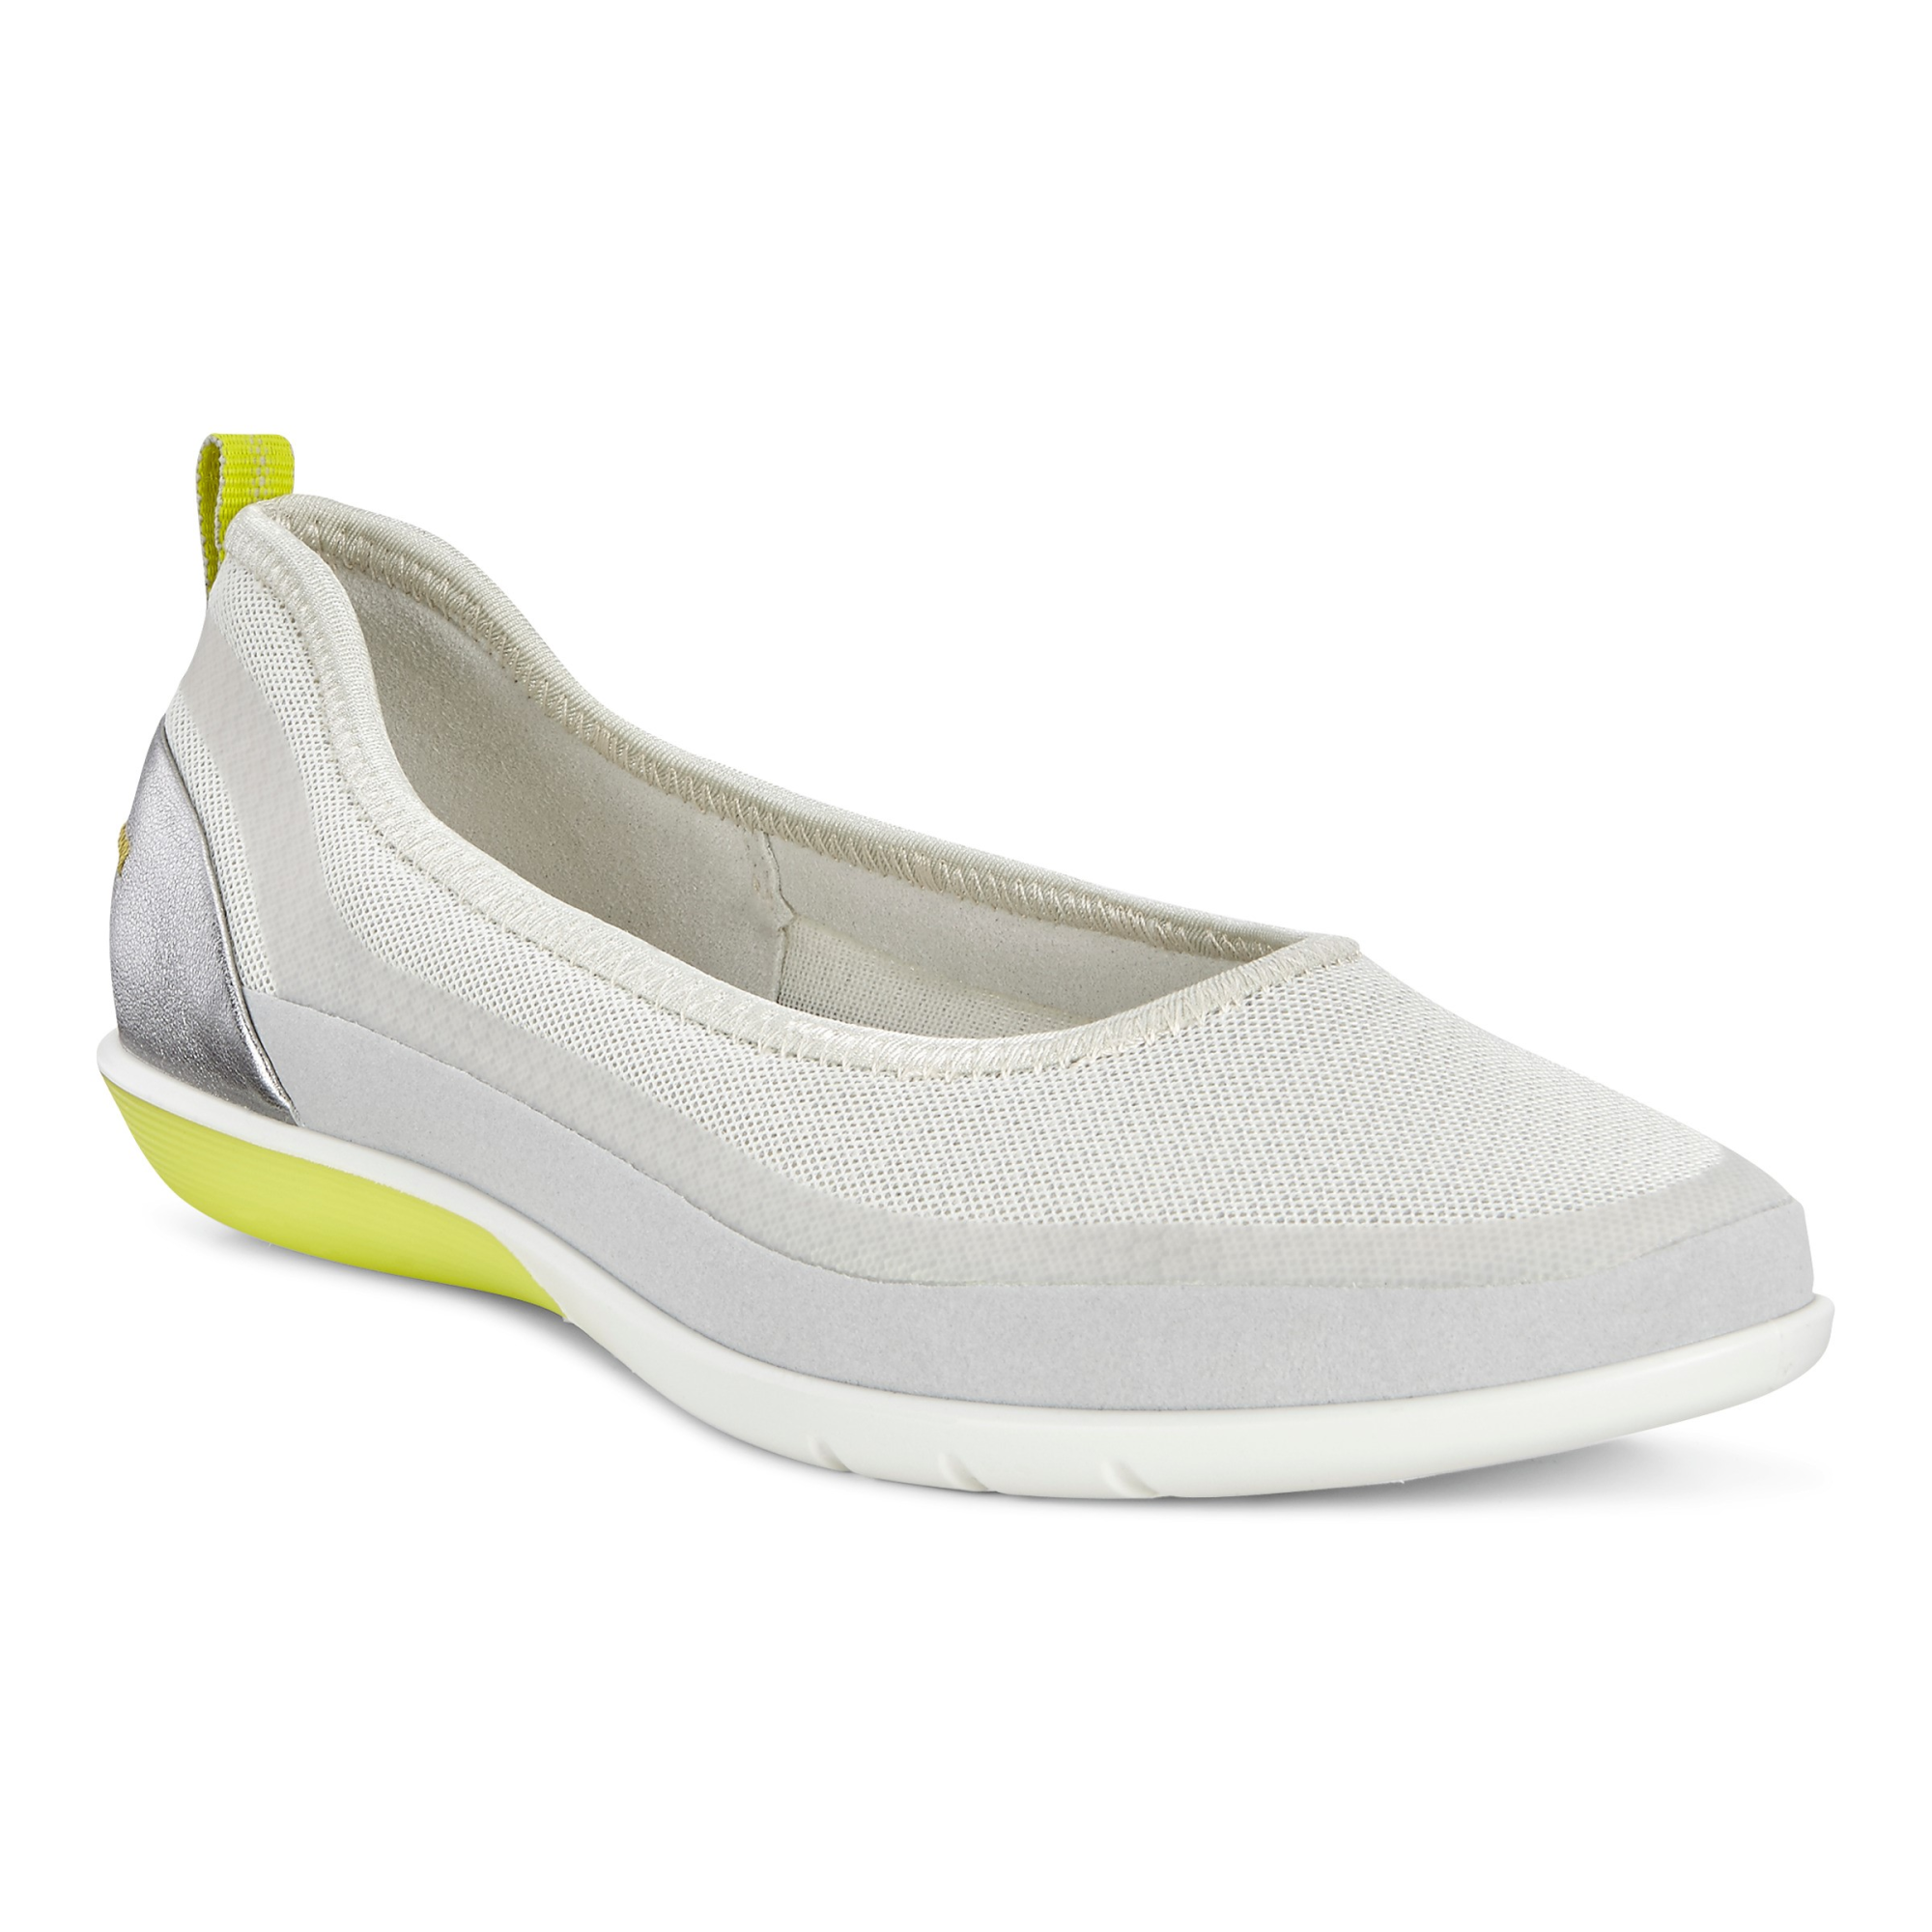 Ecco Sense Light Ballerina 36 - Products Veryk - Veryk Mall, many product, quick response, safe your money!